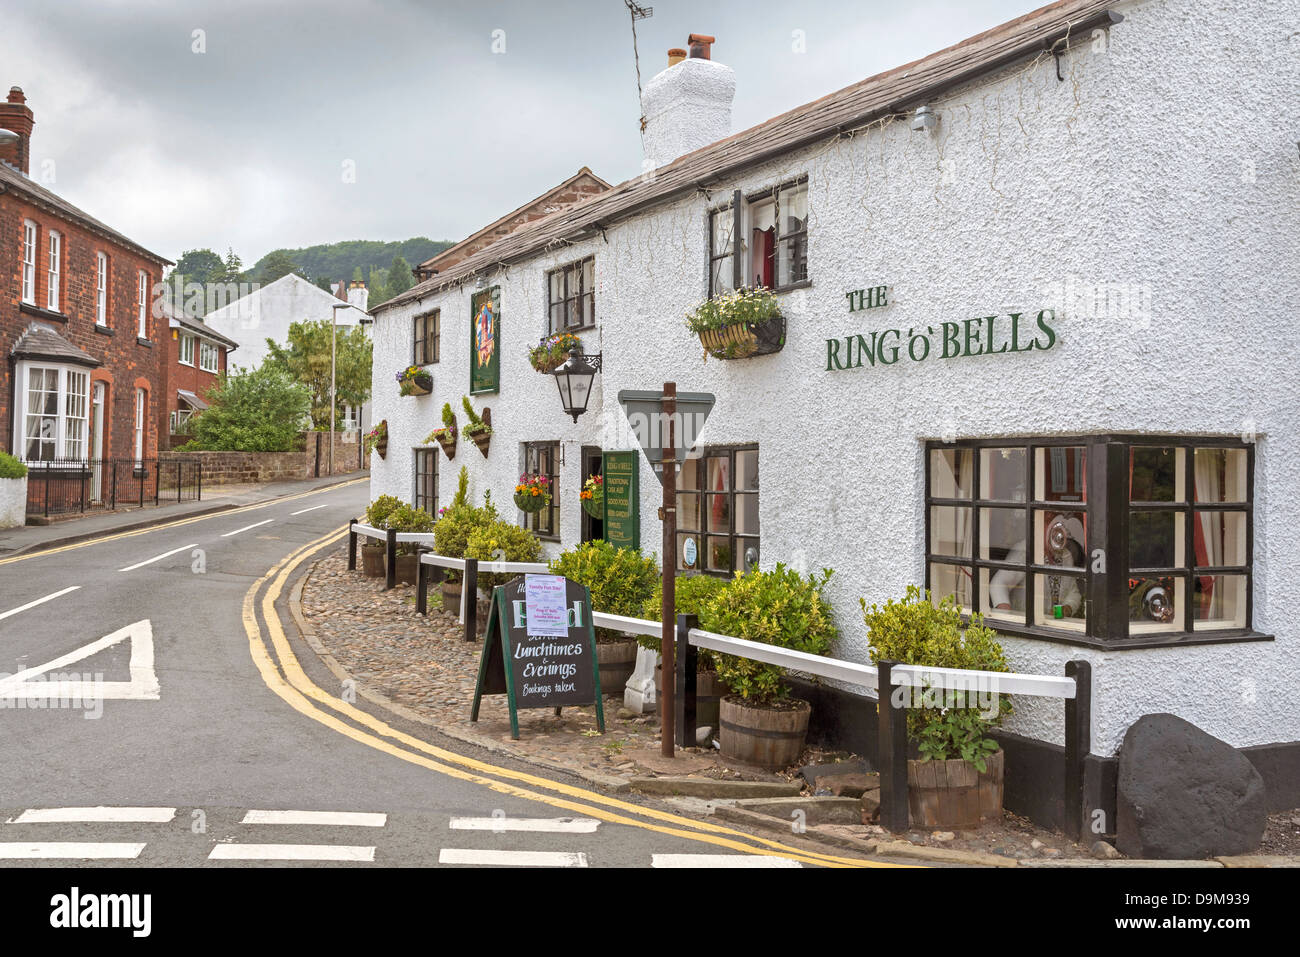 Boarded up Ring O Bells pub in Sandbach UK Stock Photo - Alamy